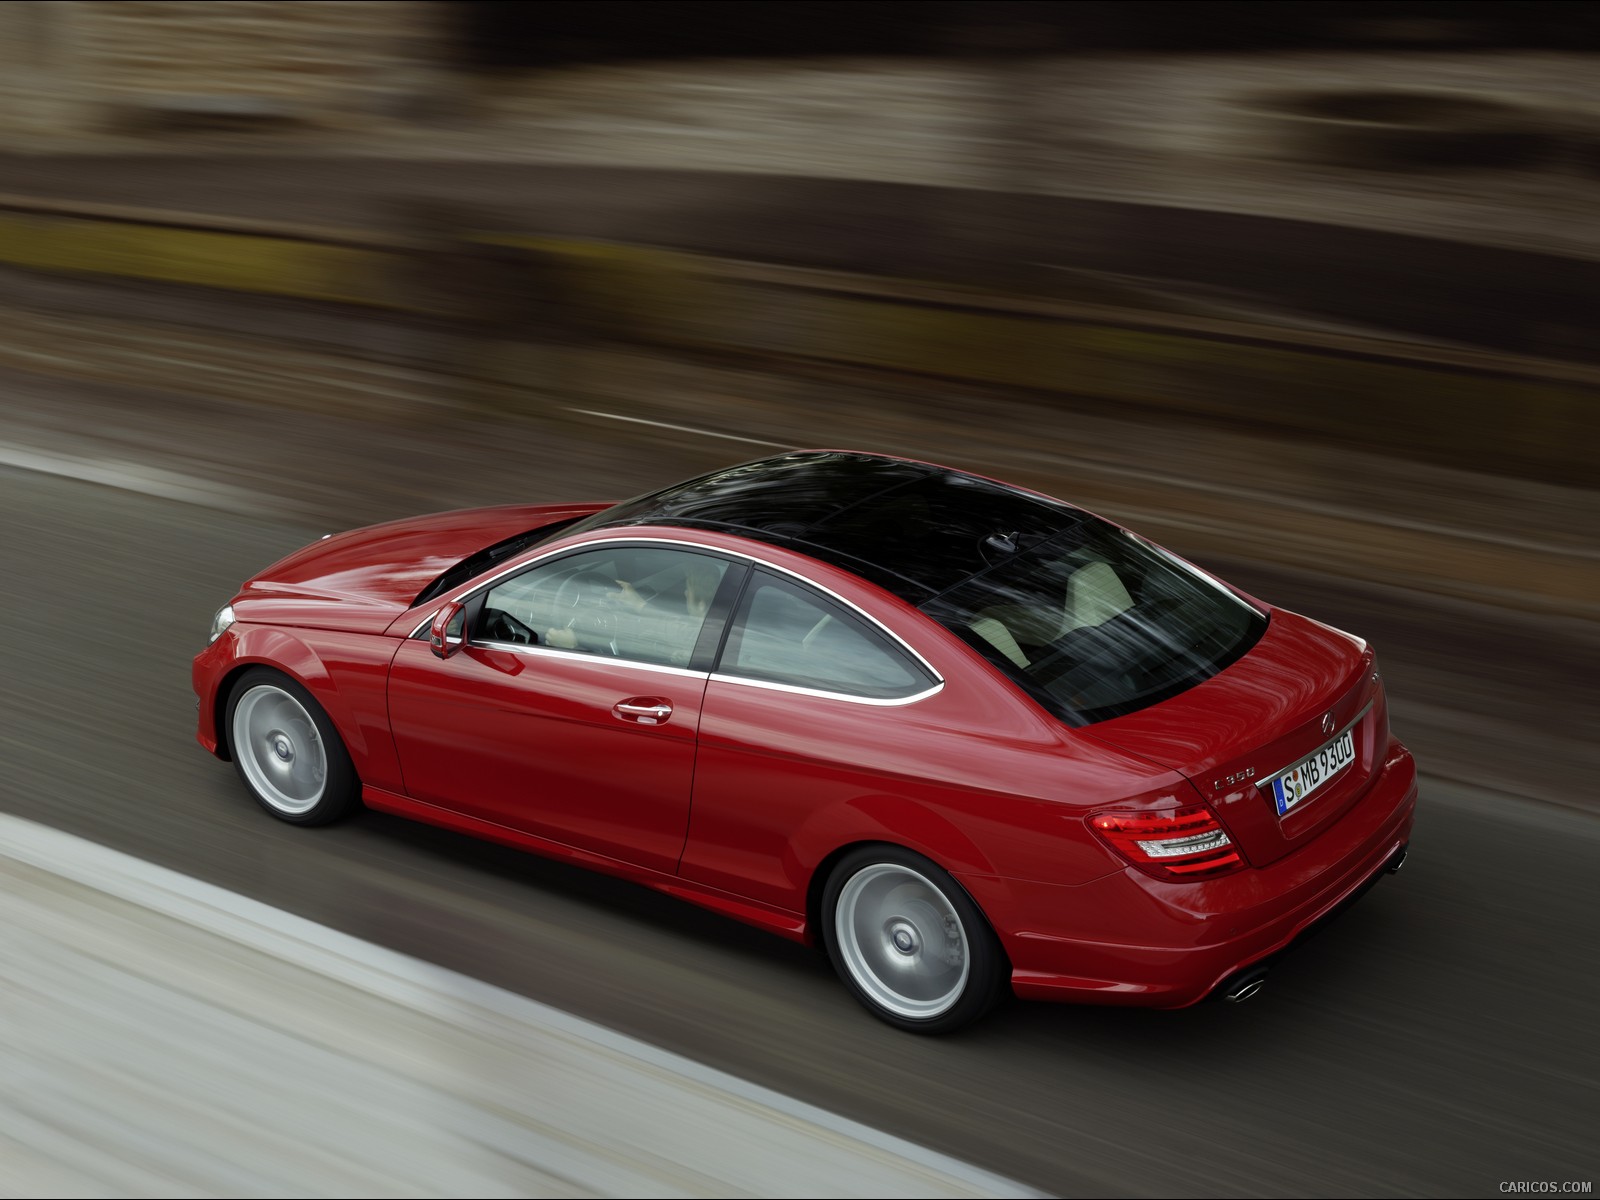 Mercedes-Benz C-Class Coupe (2012)  - Top, #40 of 79